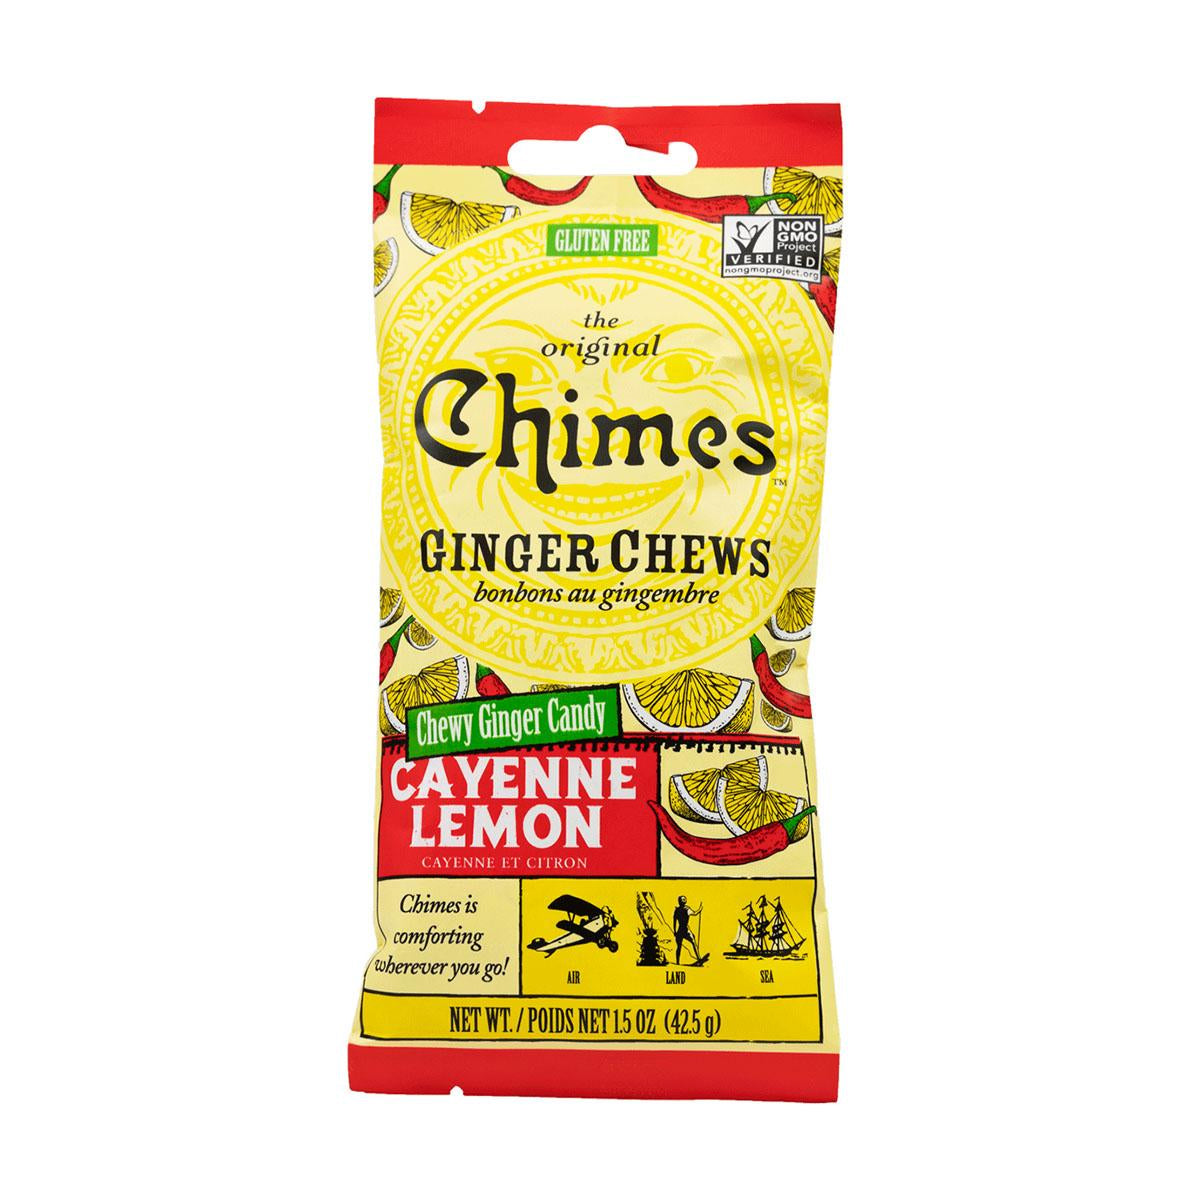 Primary image of Cayenne Lemon Ginger Chews Small Bag